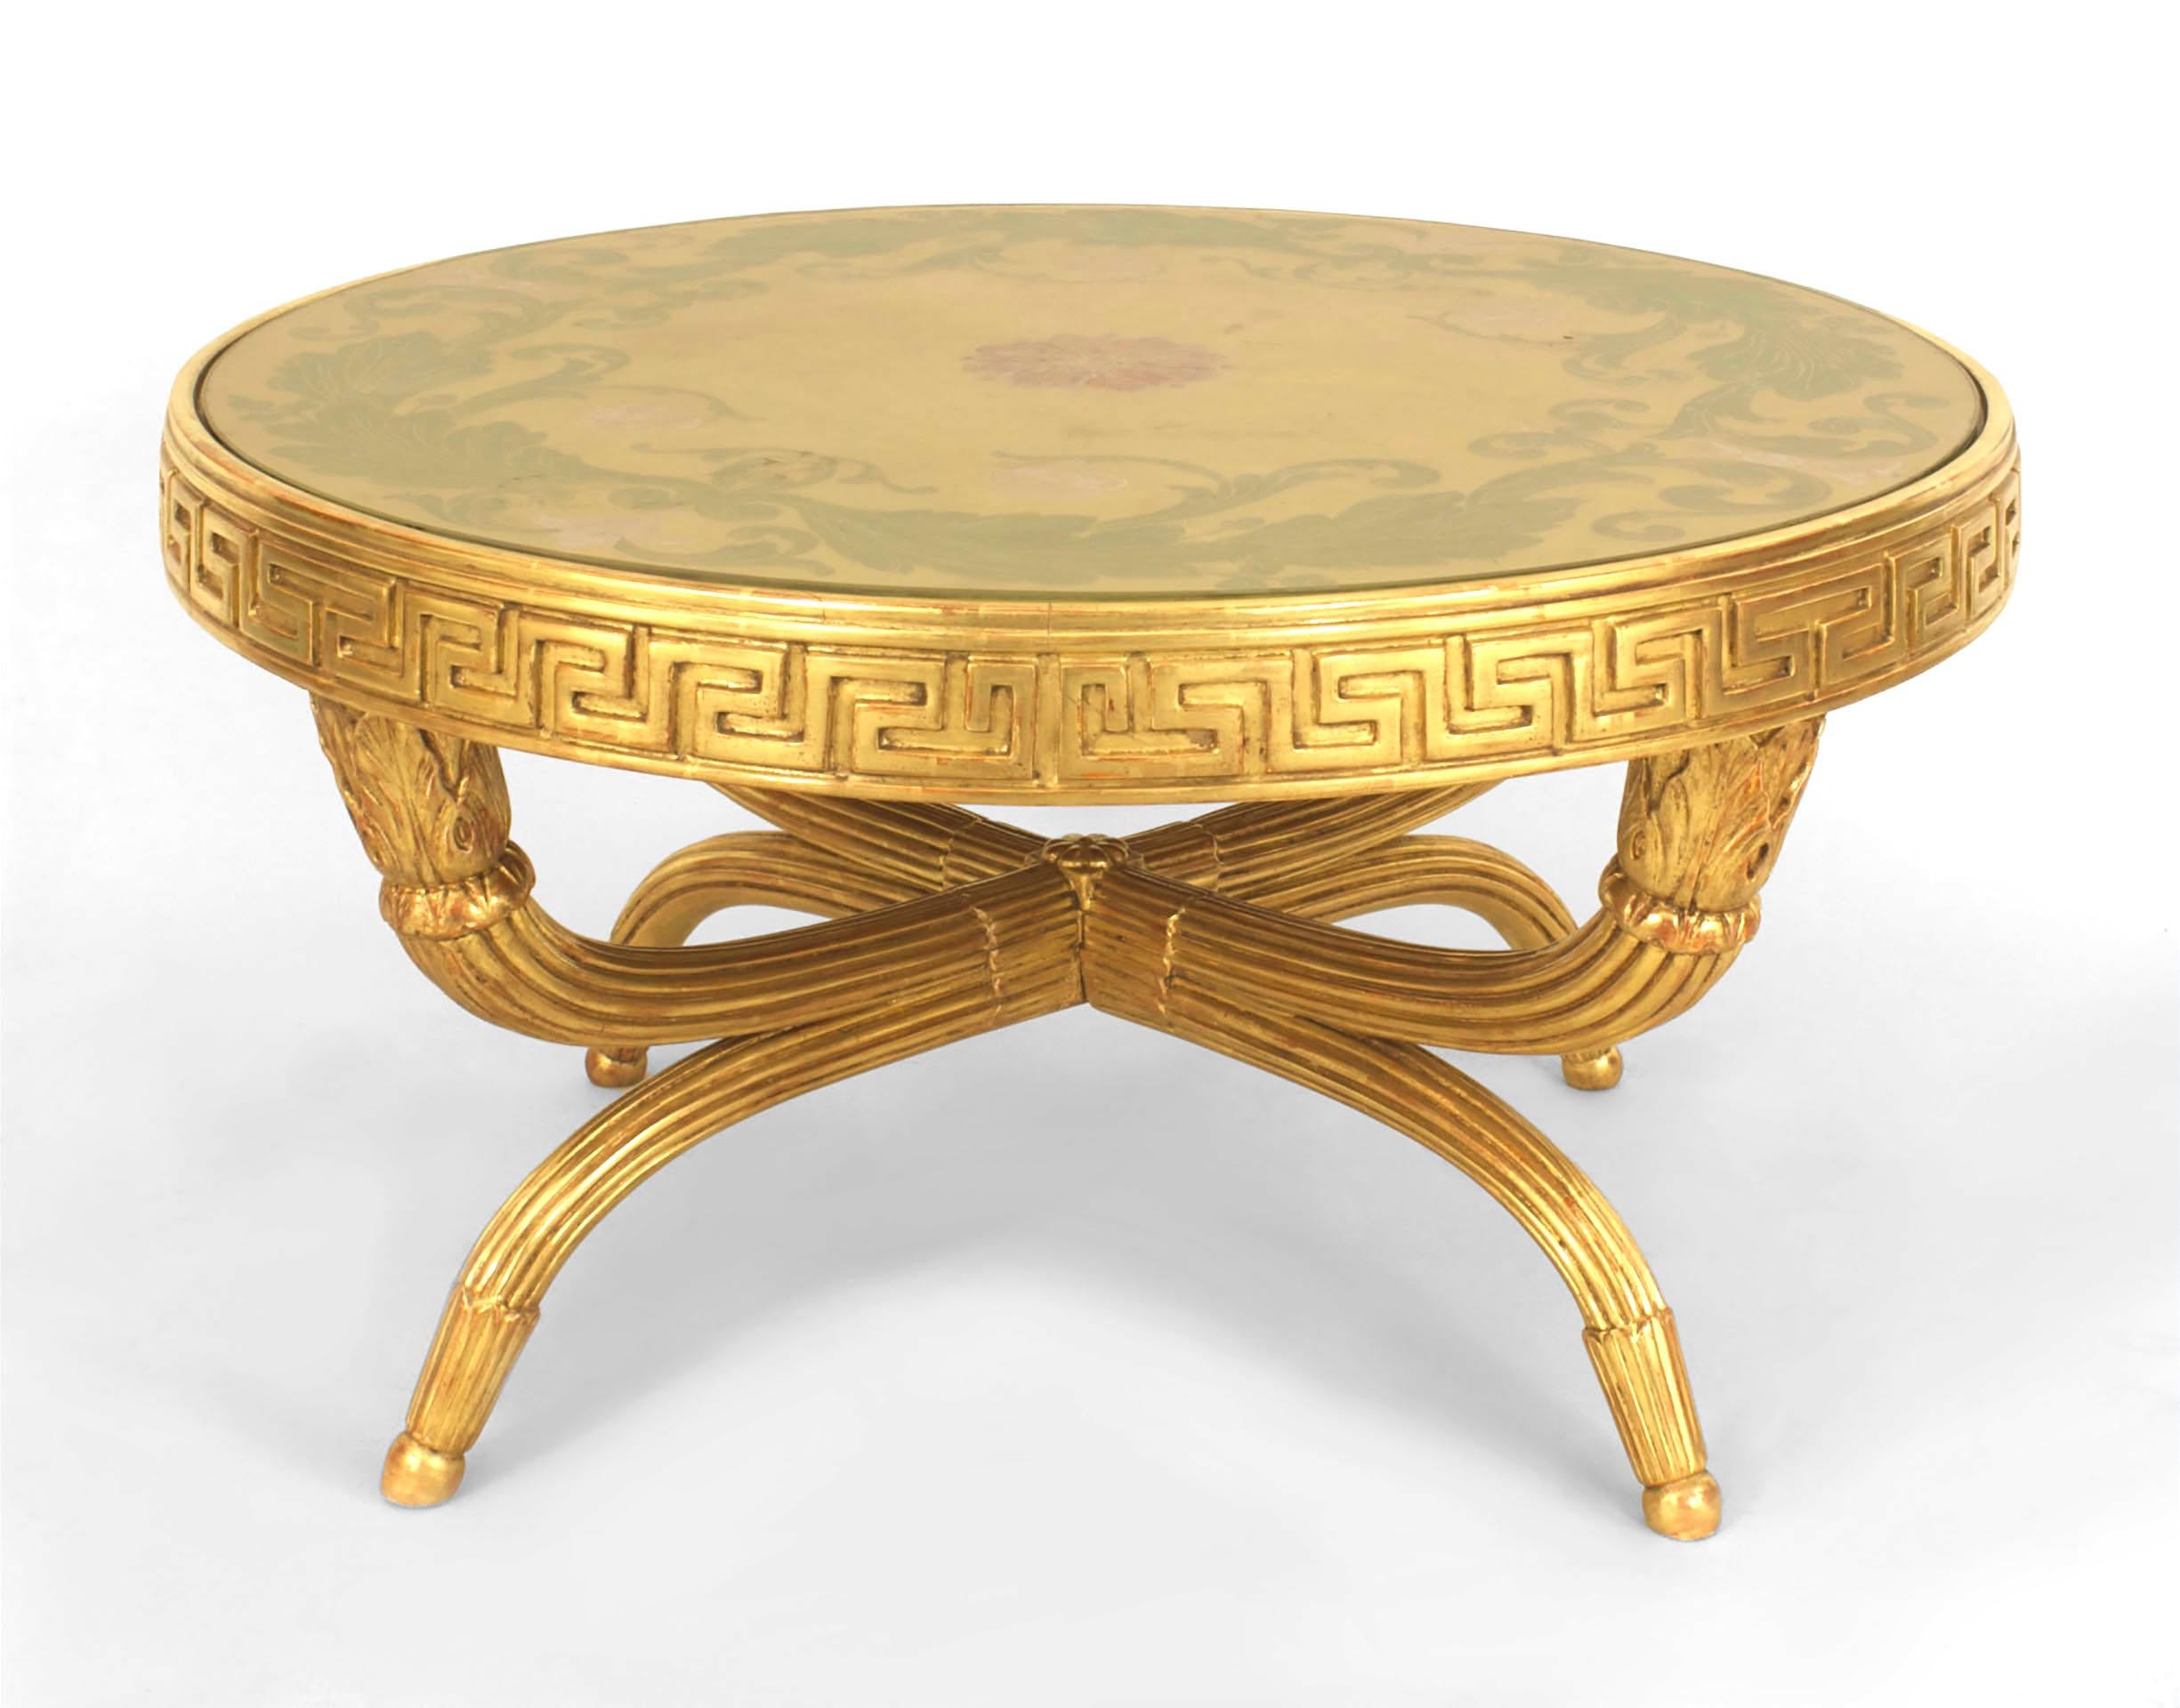 Gilt-wood round coffee table with an églomisé decorated top over a Greek key frieze supported by crossed fluted legs with acanthus tipped feet.